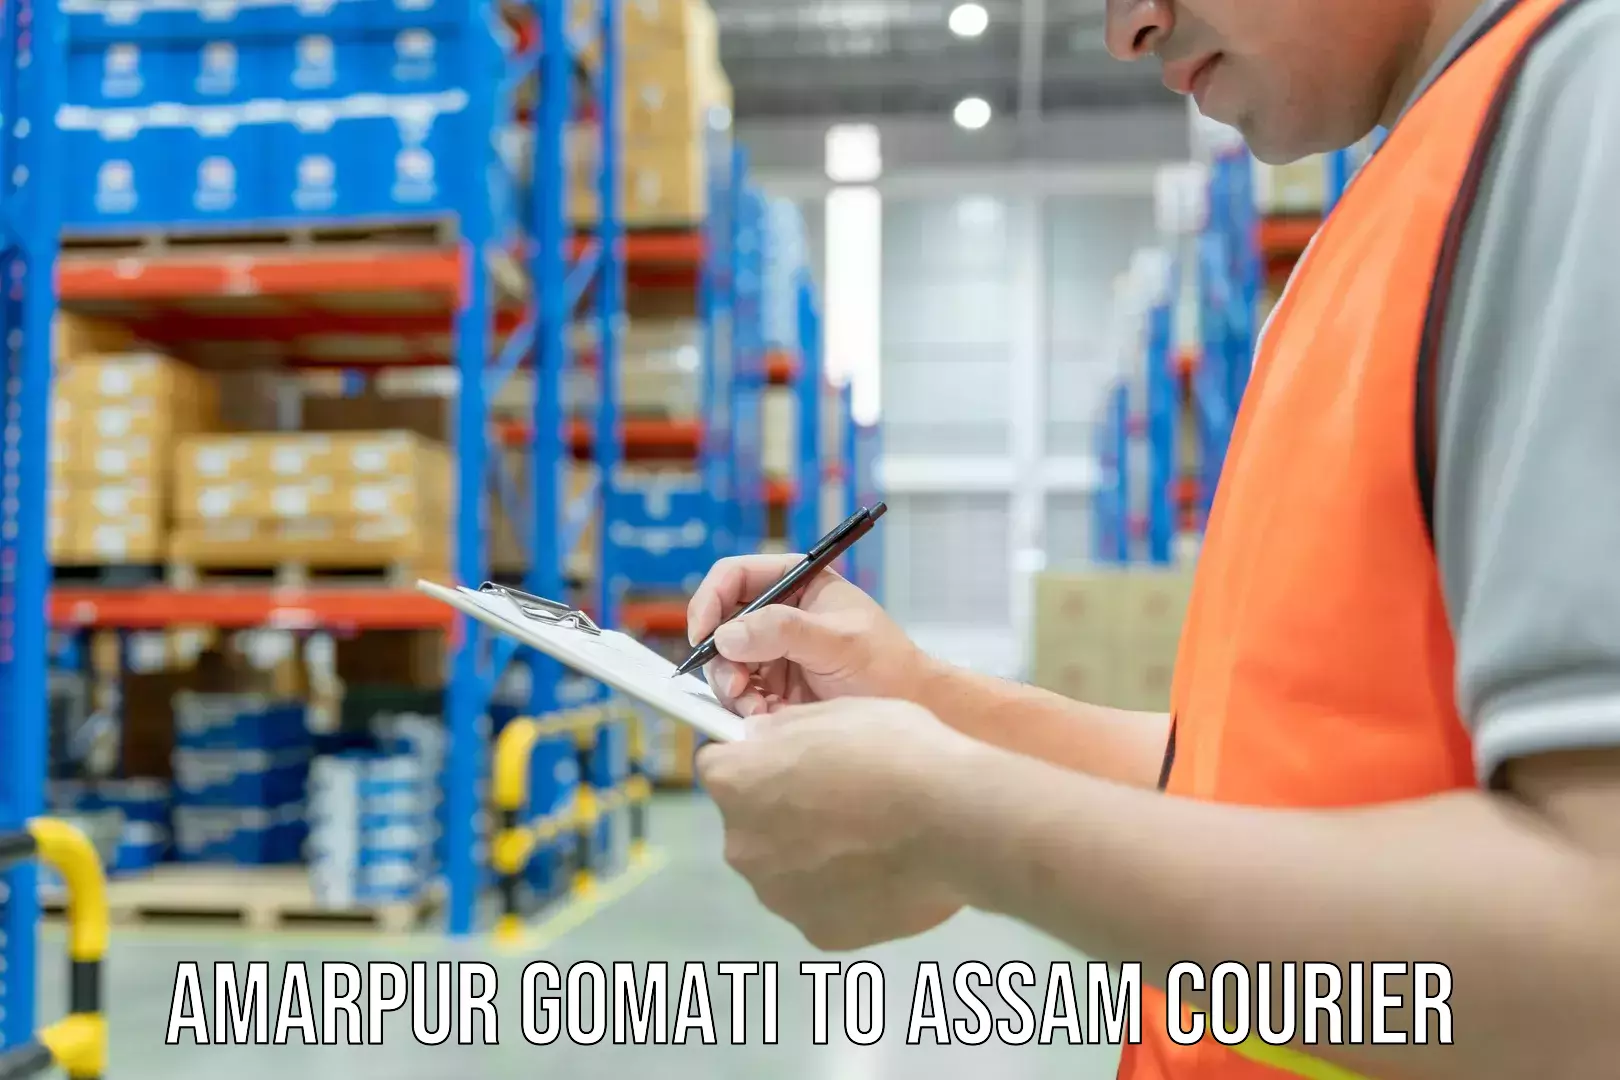 Express package services Amarpur Gomati to Assam